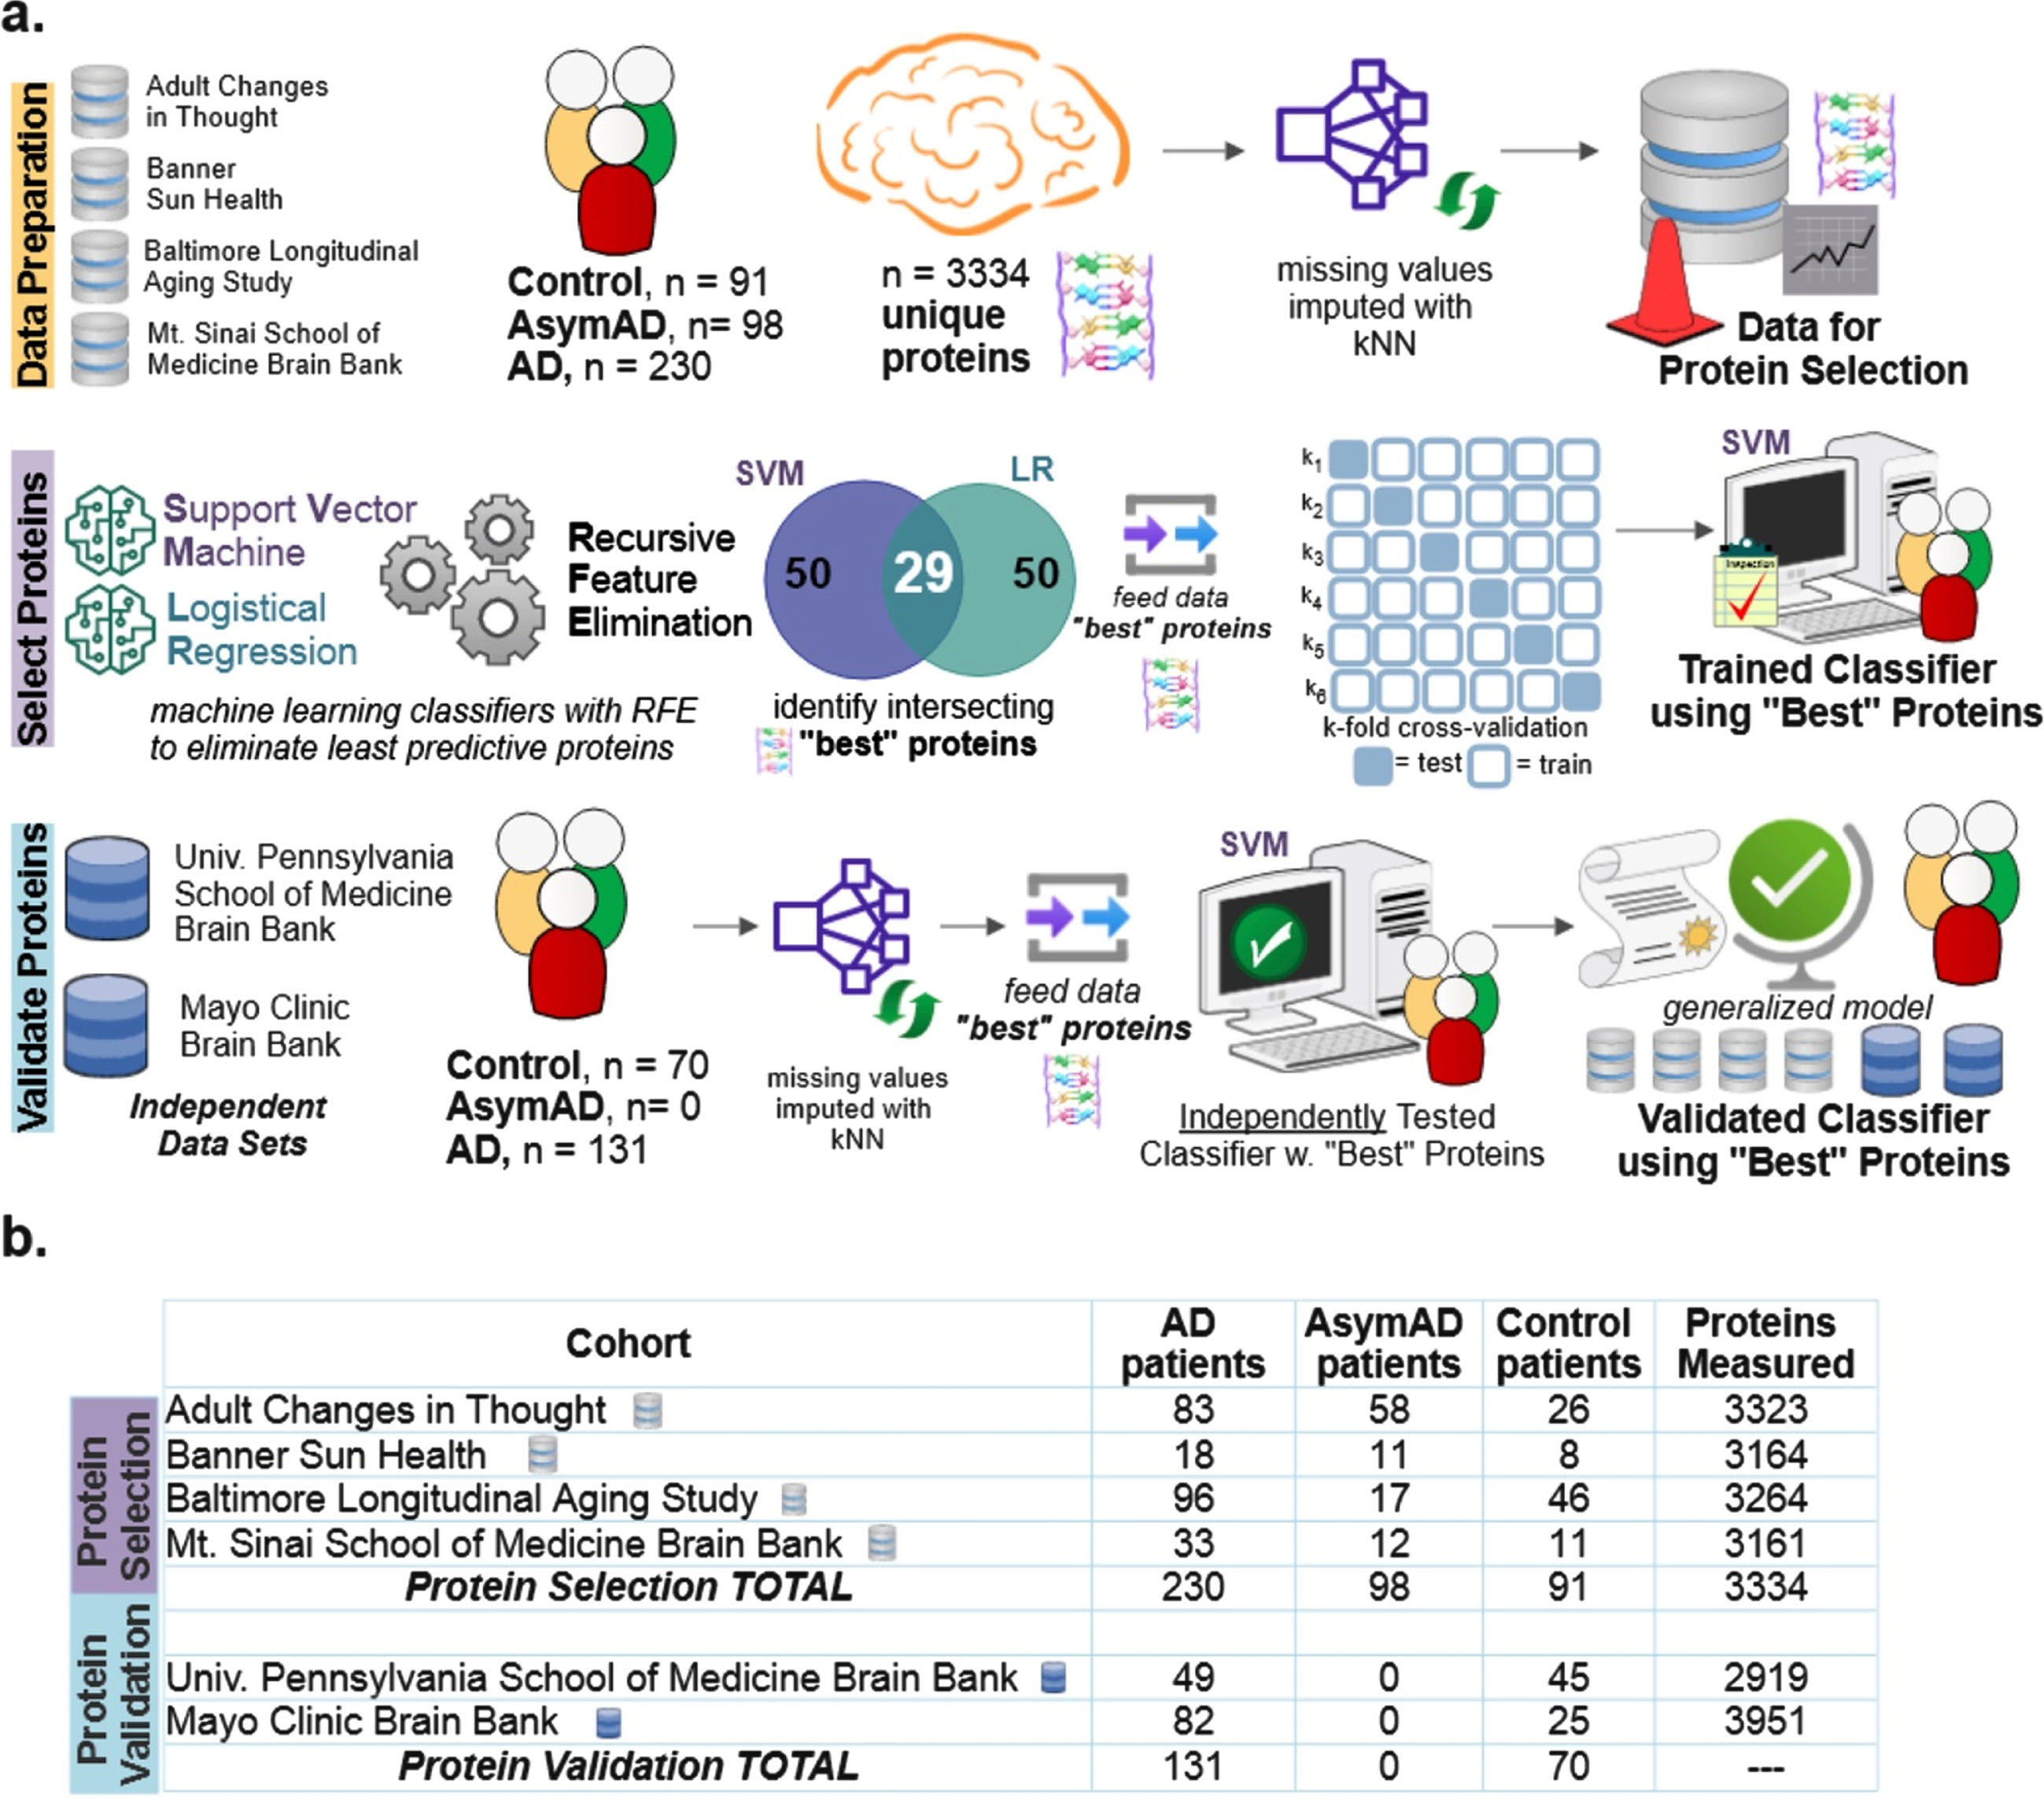 Diagram explaining the data and machine learning pipeline to identify a subset of “best” predictive protein biomarkers to accurately classify Alzheimer’s disease (AD), asymptomatic Alzheimer’s disease (AsymAD), or Control. a) Machine learning pipeline consisted of data preparation, protein selection, and model validation with selected proteins. Data was prepared by aggregating four cohorts (n = 419 subjects, n = 3,334 unique proteins) and imputing missing values using k-nearest neighbor algorithm. The most predictive proteins were selected using recursive feature elimination (RFE) to construct and train a support vector machine (SVM) classifier that can predict diagnosis using only the selected “best” proteins (n = 29 or n = 88 best predictive proteins). Finally, the developed classifier model was independently validated using 2 additional cohorts (n = 201 subjects) to ensure the model’s performance generalizes to new data. b) Details of six data cohorts used in protein selection (4 cohorts) and validation (2 cohorts), including sample sizes.